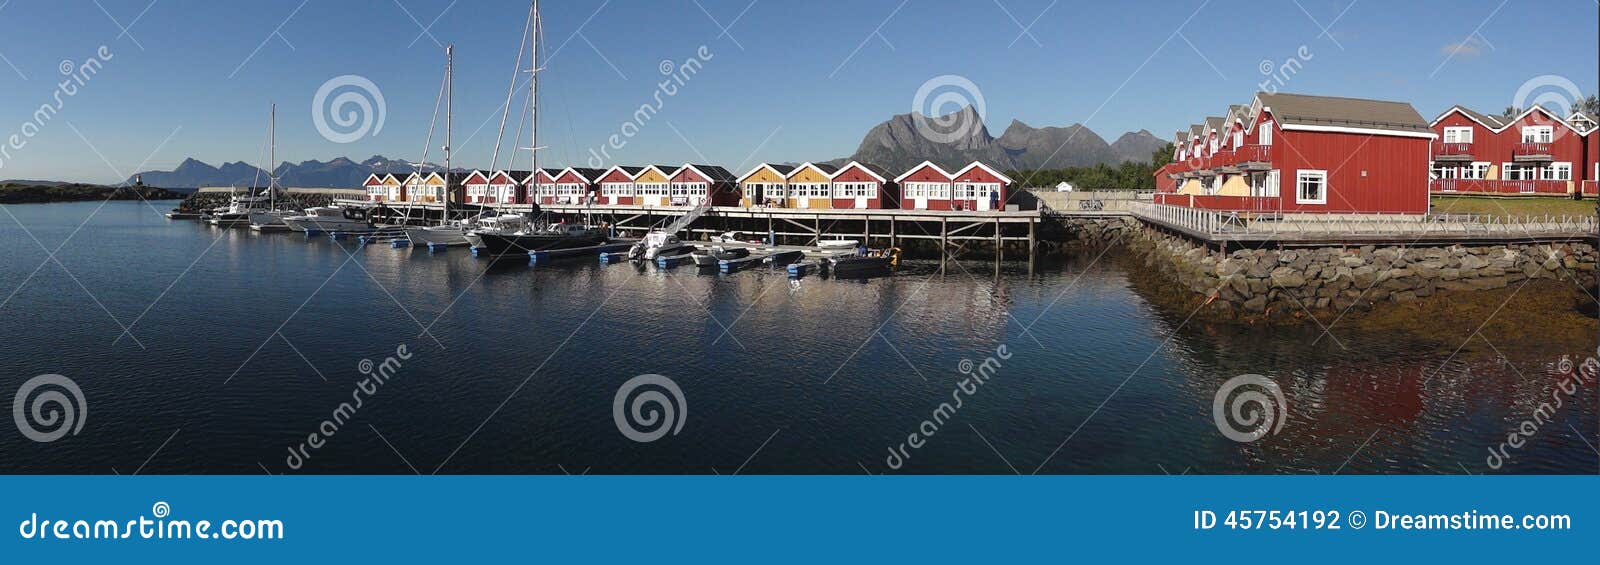 village by the sea in norway